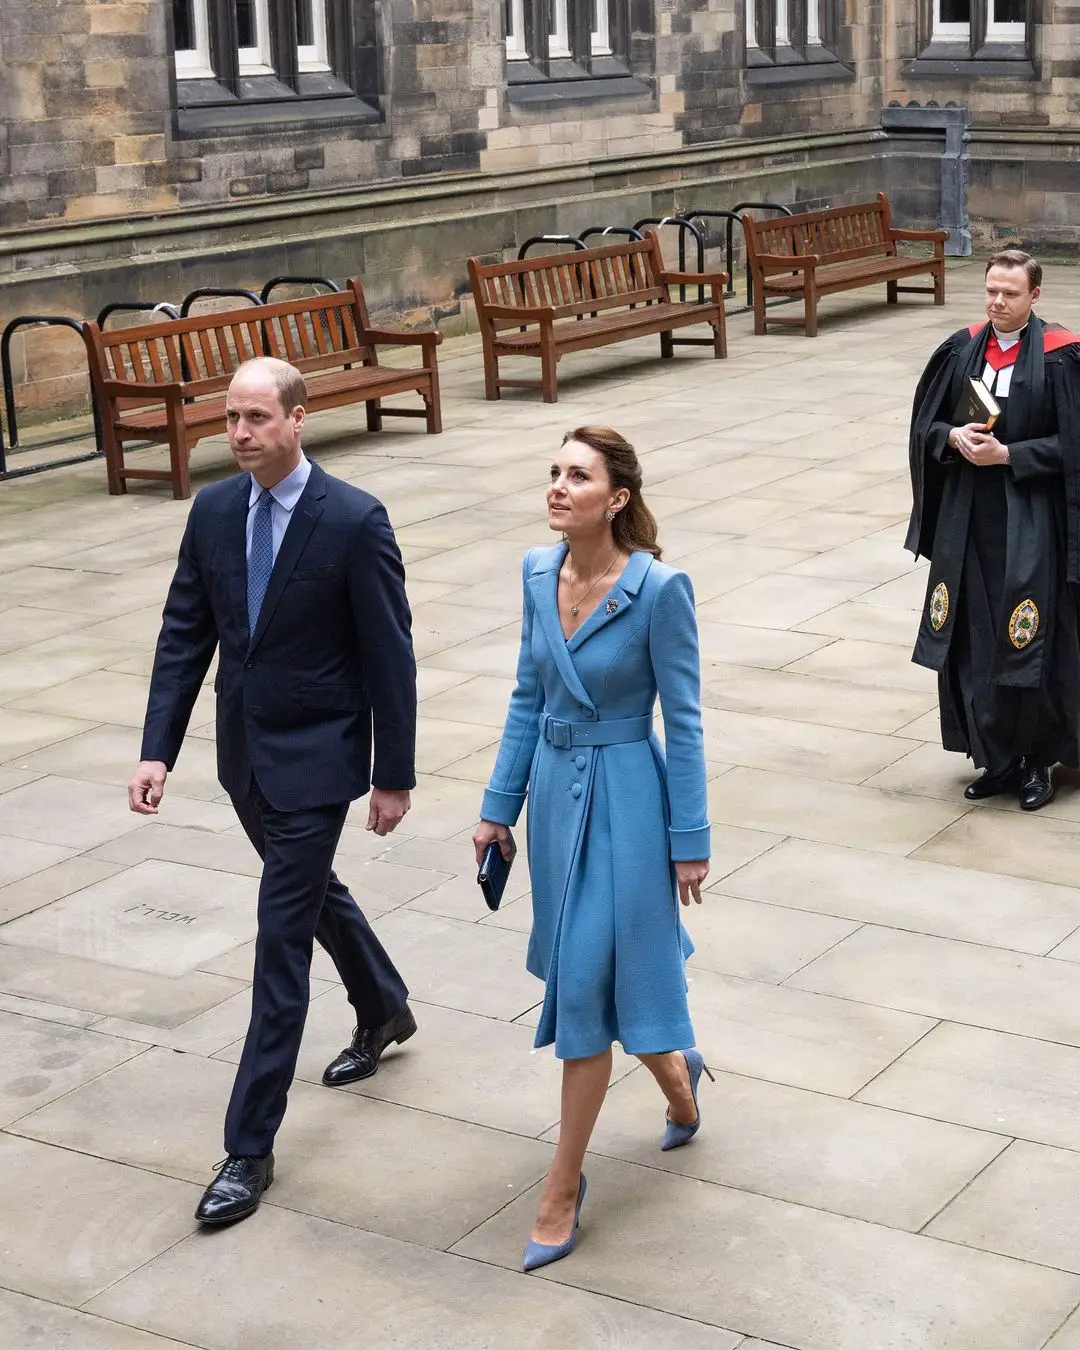 The Duke and Duchess of Cambridge's Royal Tour of Scotland ended at the same location where it started last week